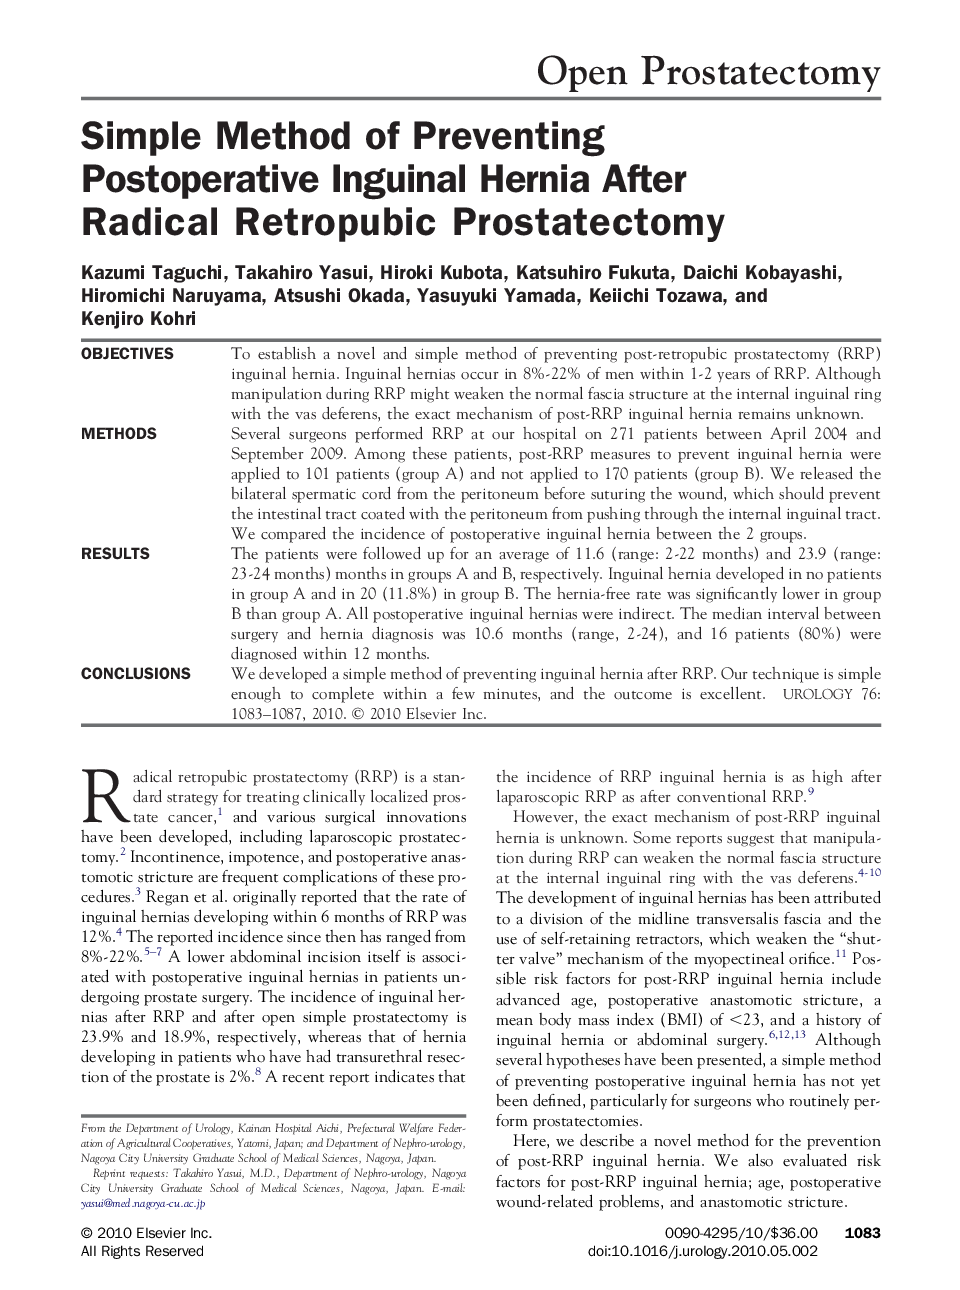 Simple Method of Preventing Postoperative Inguinal Hernia After Radical Retropubic Prostatectomy